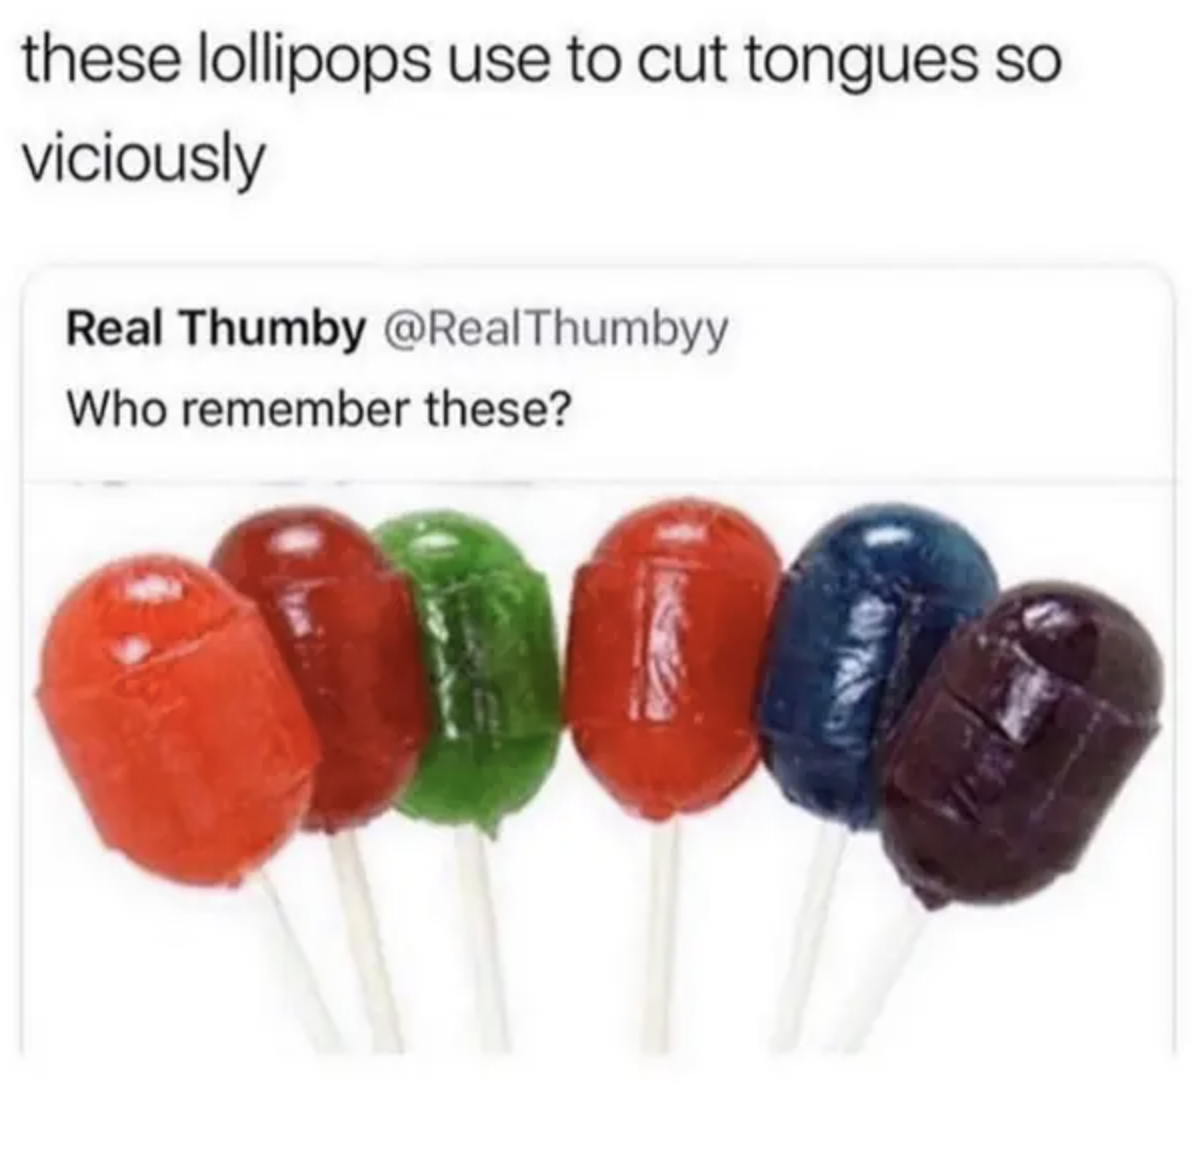 &quot;these lollipops used to cut tongues so viciously&quot;